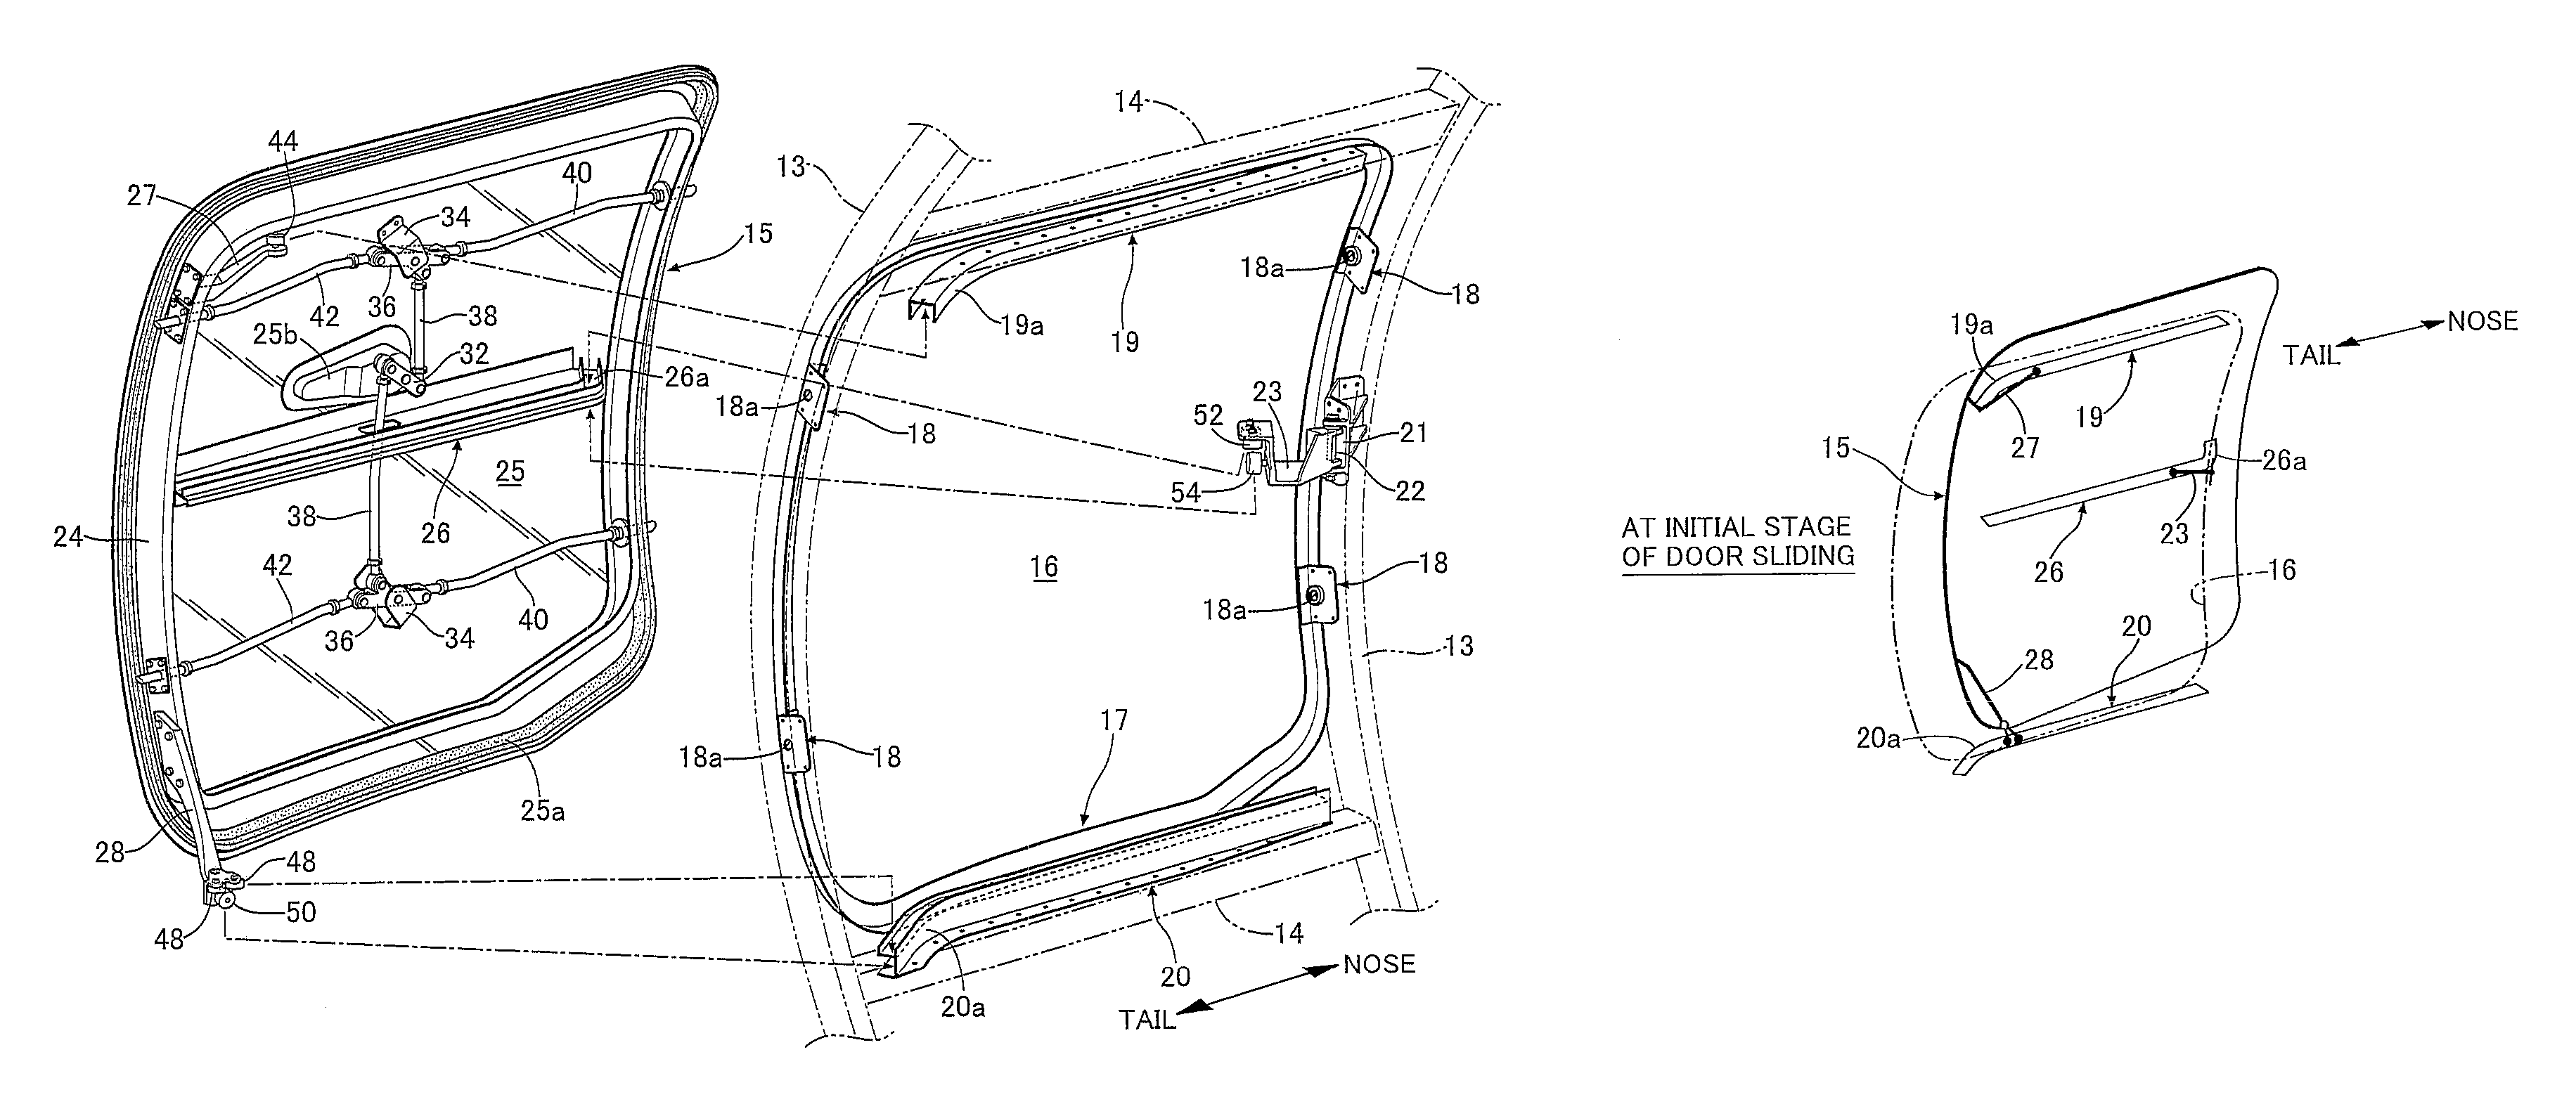 Slide door device for aircraft